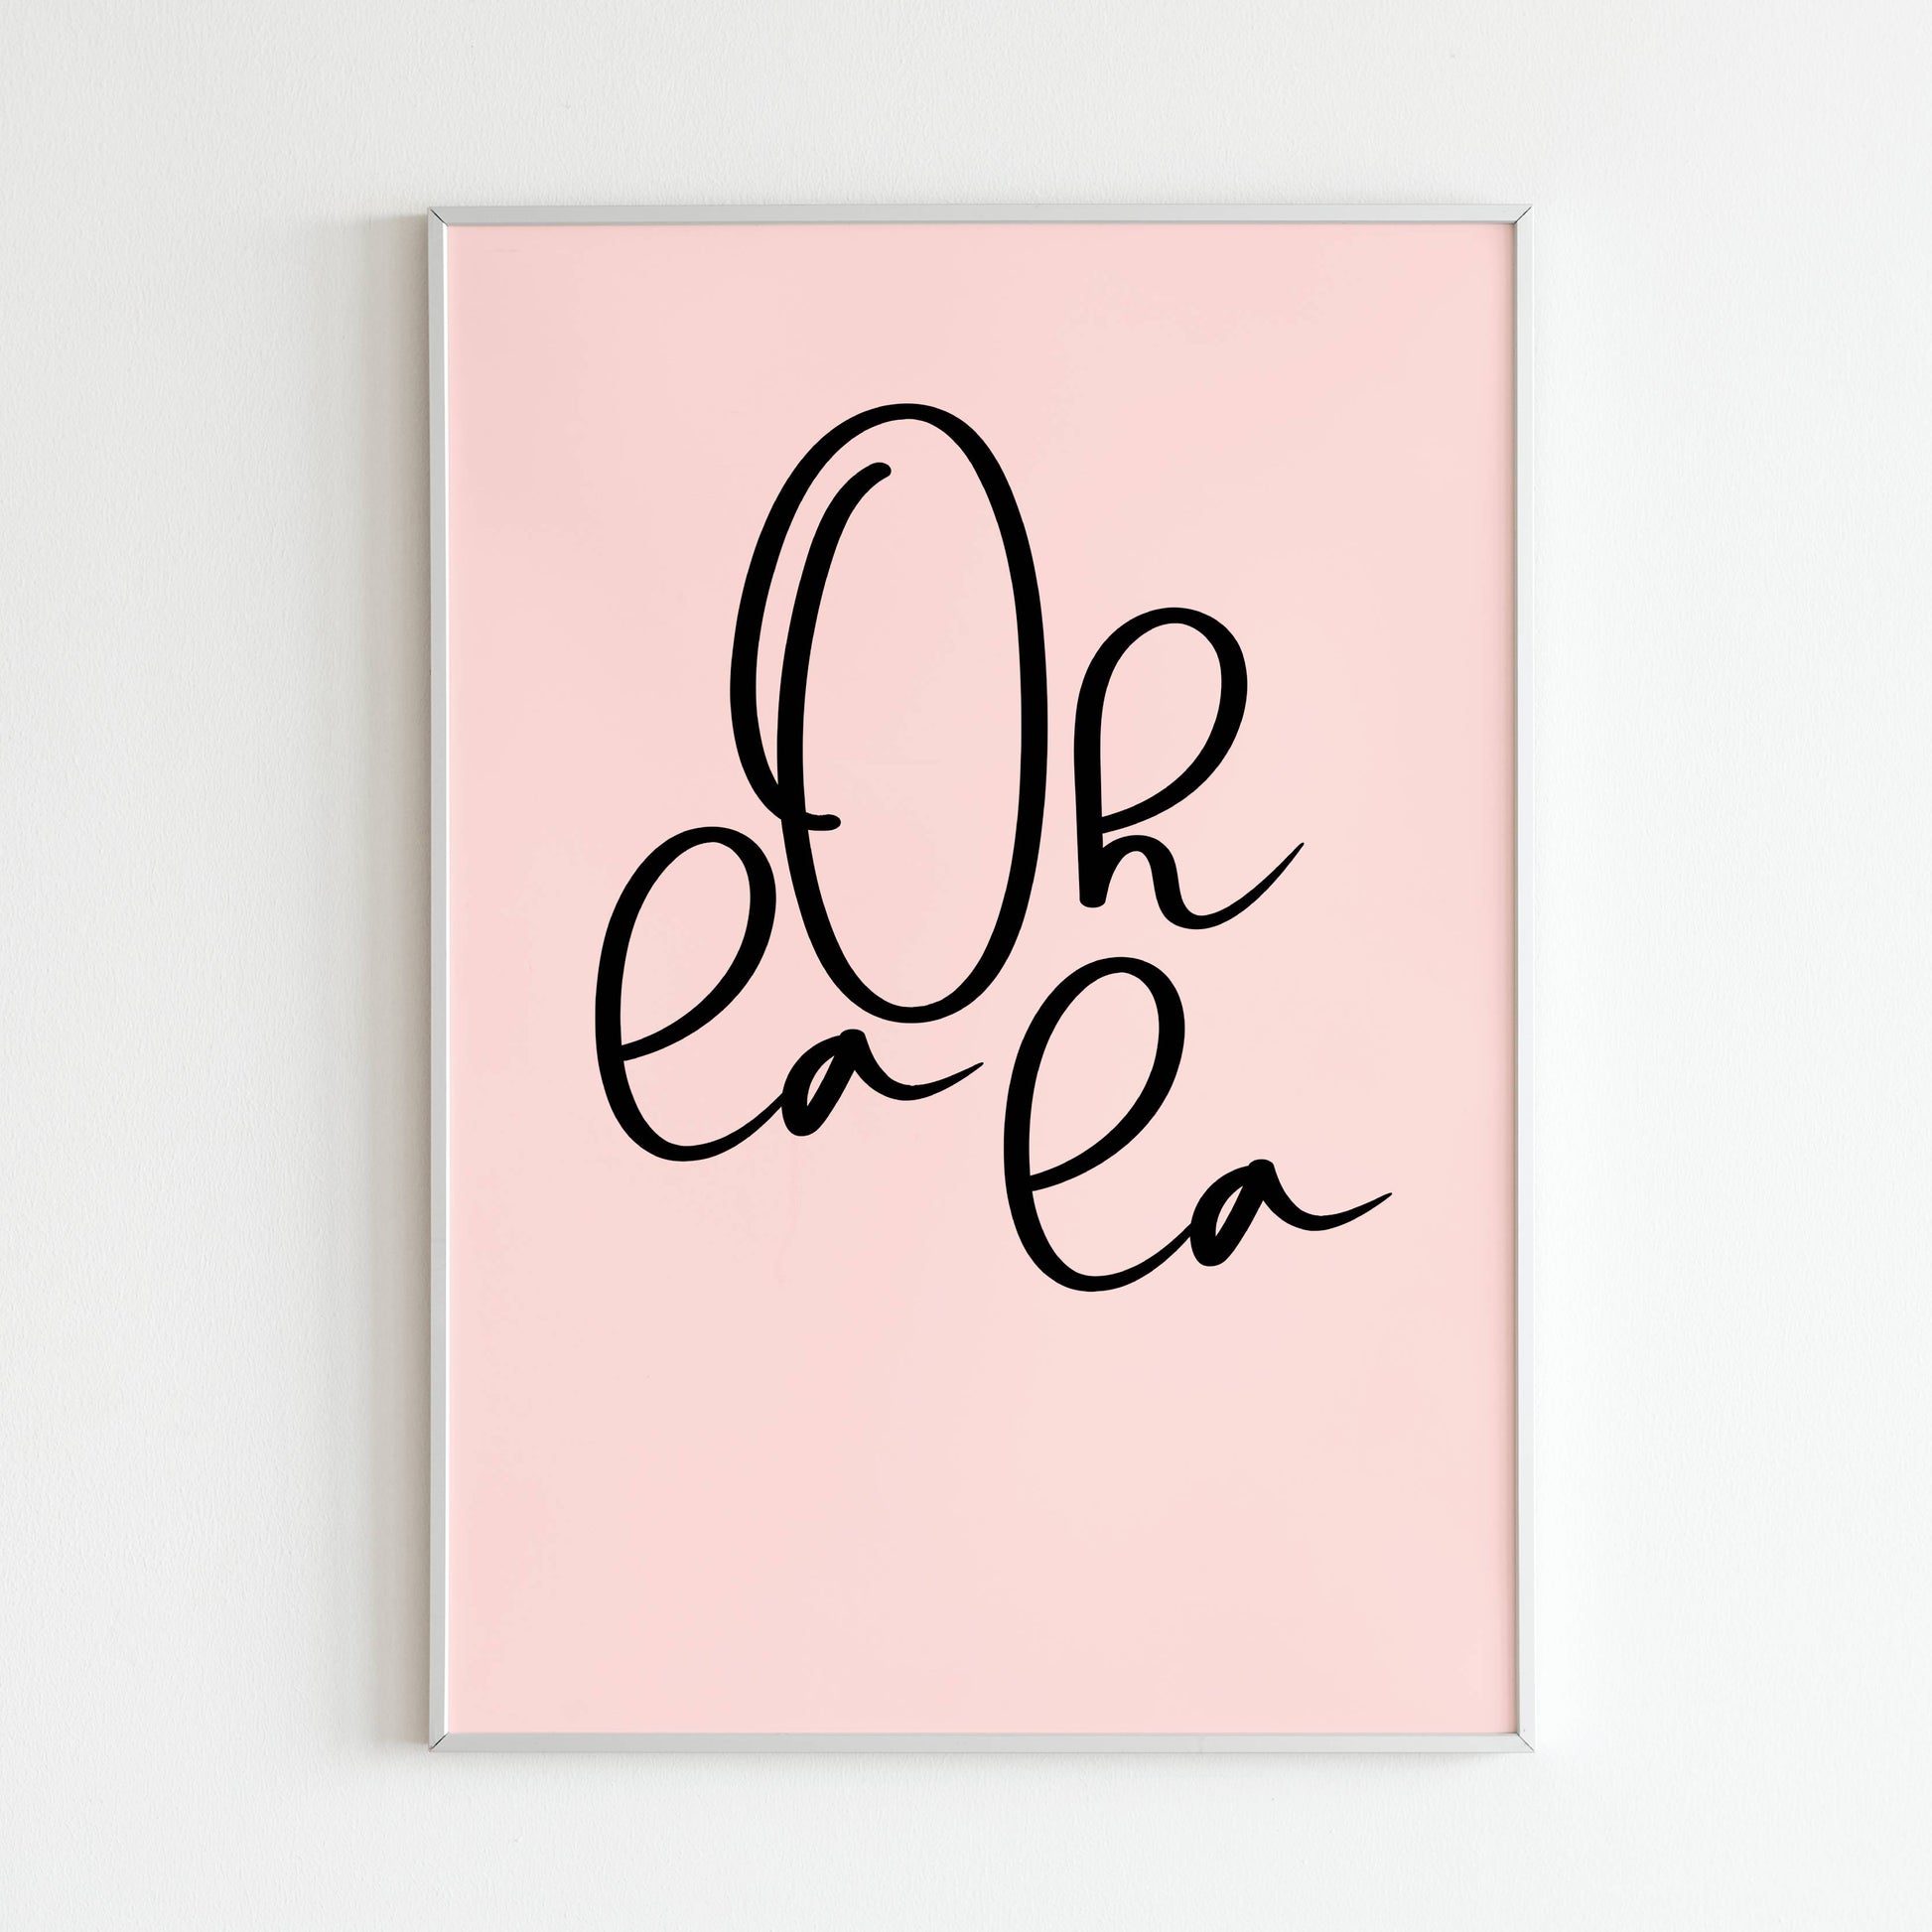 Downloadable "Oh la la" art print, add a touch of Parisian flair to your space.